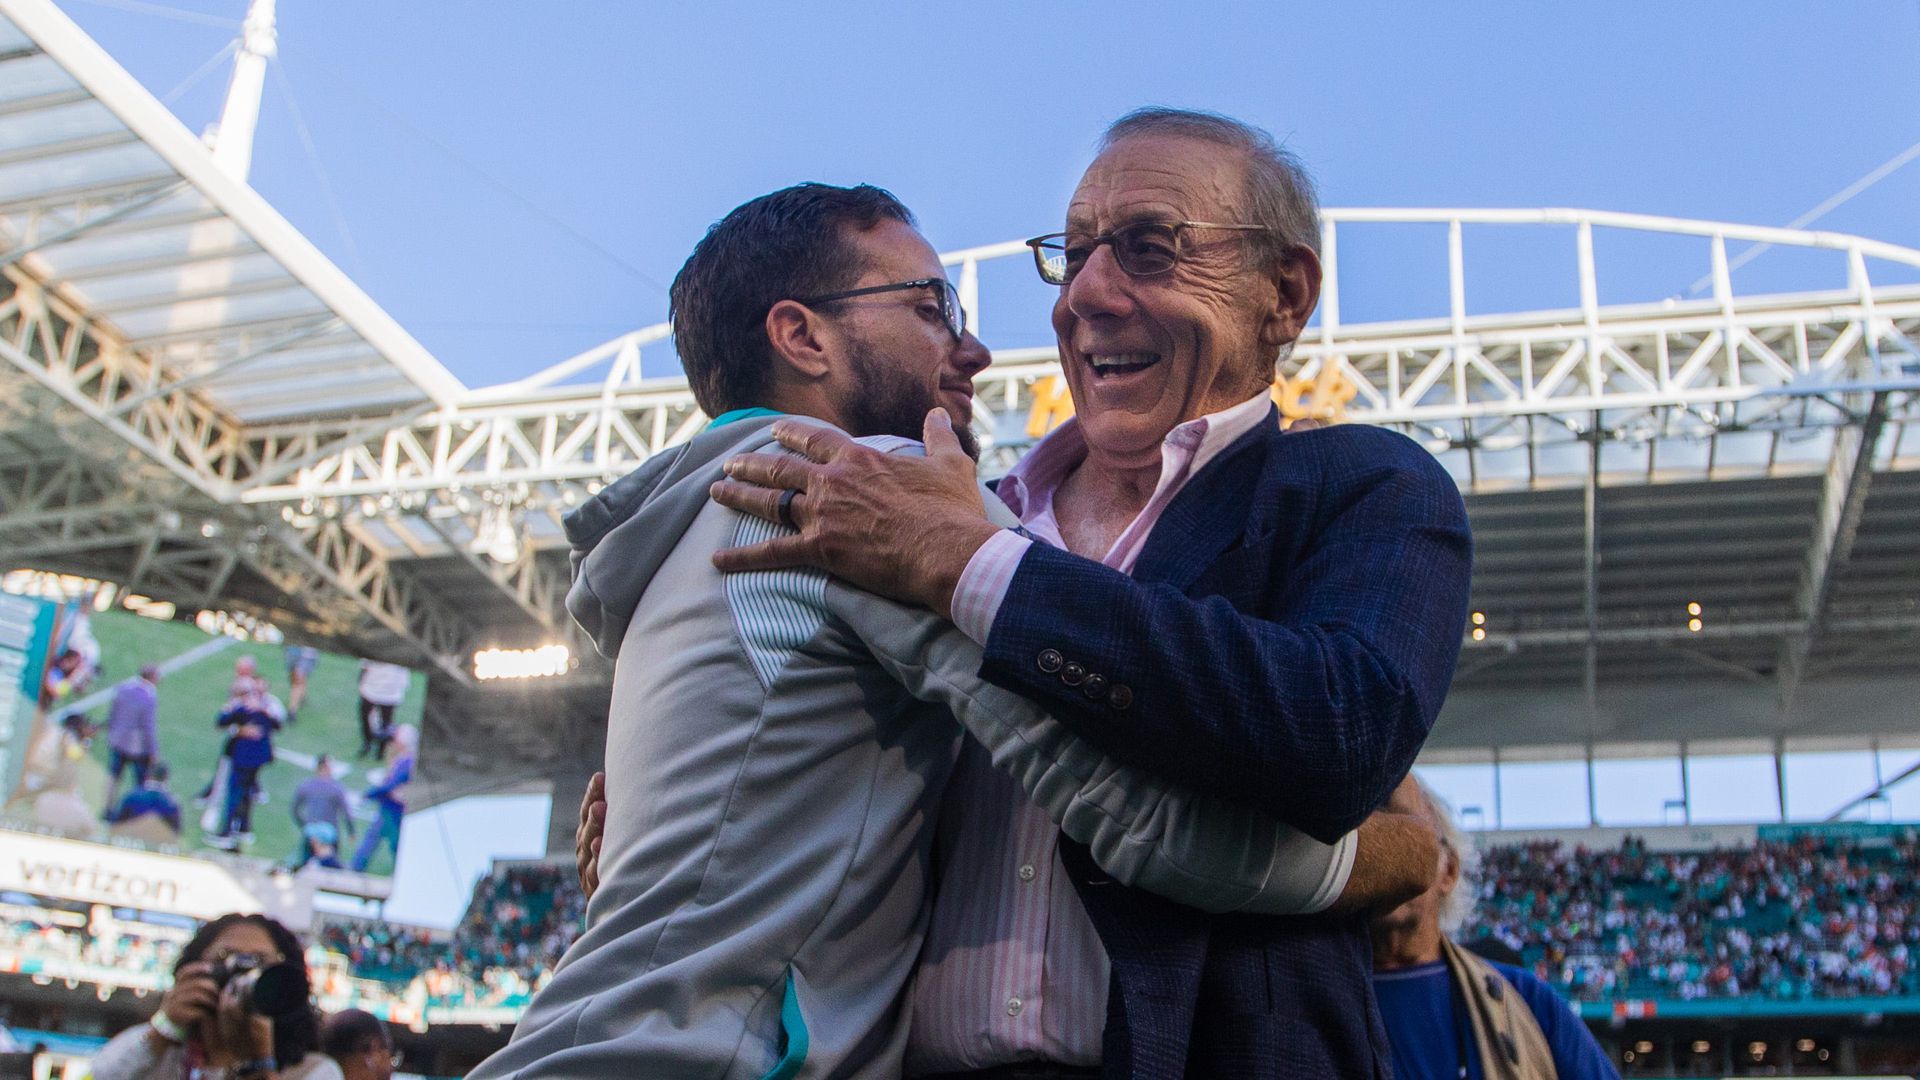 dolphins owner stephen ross declines whopping $10 billion offer for miami dolphins, formula one race